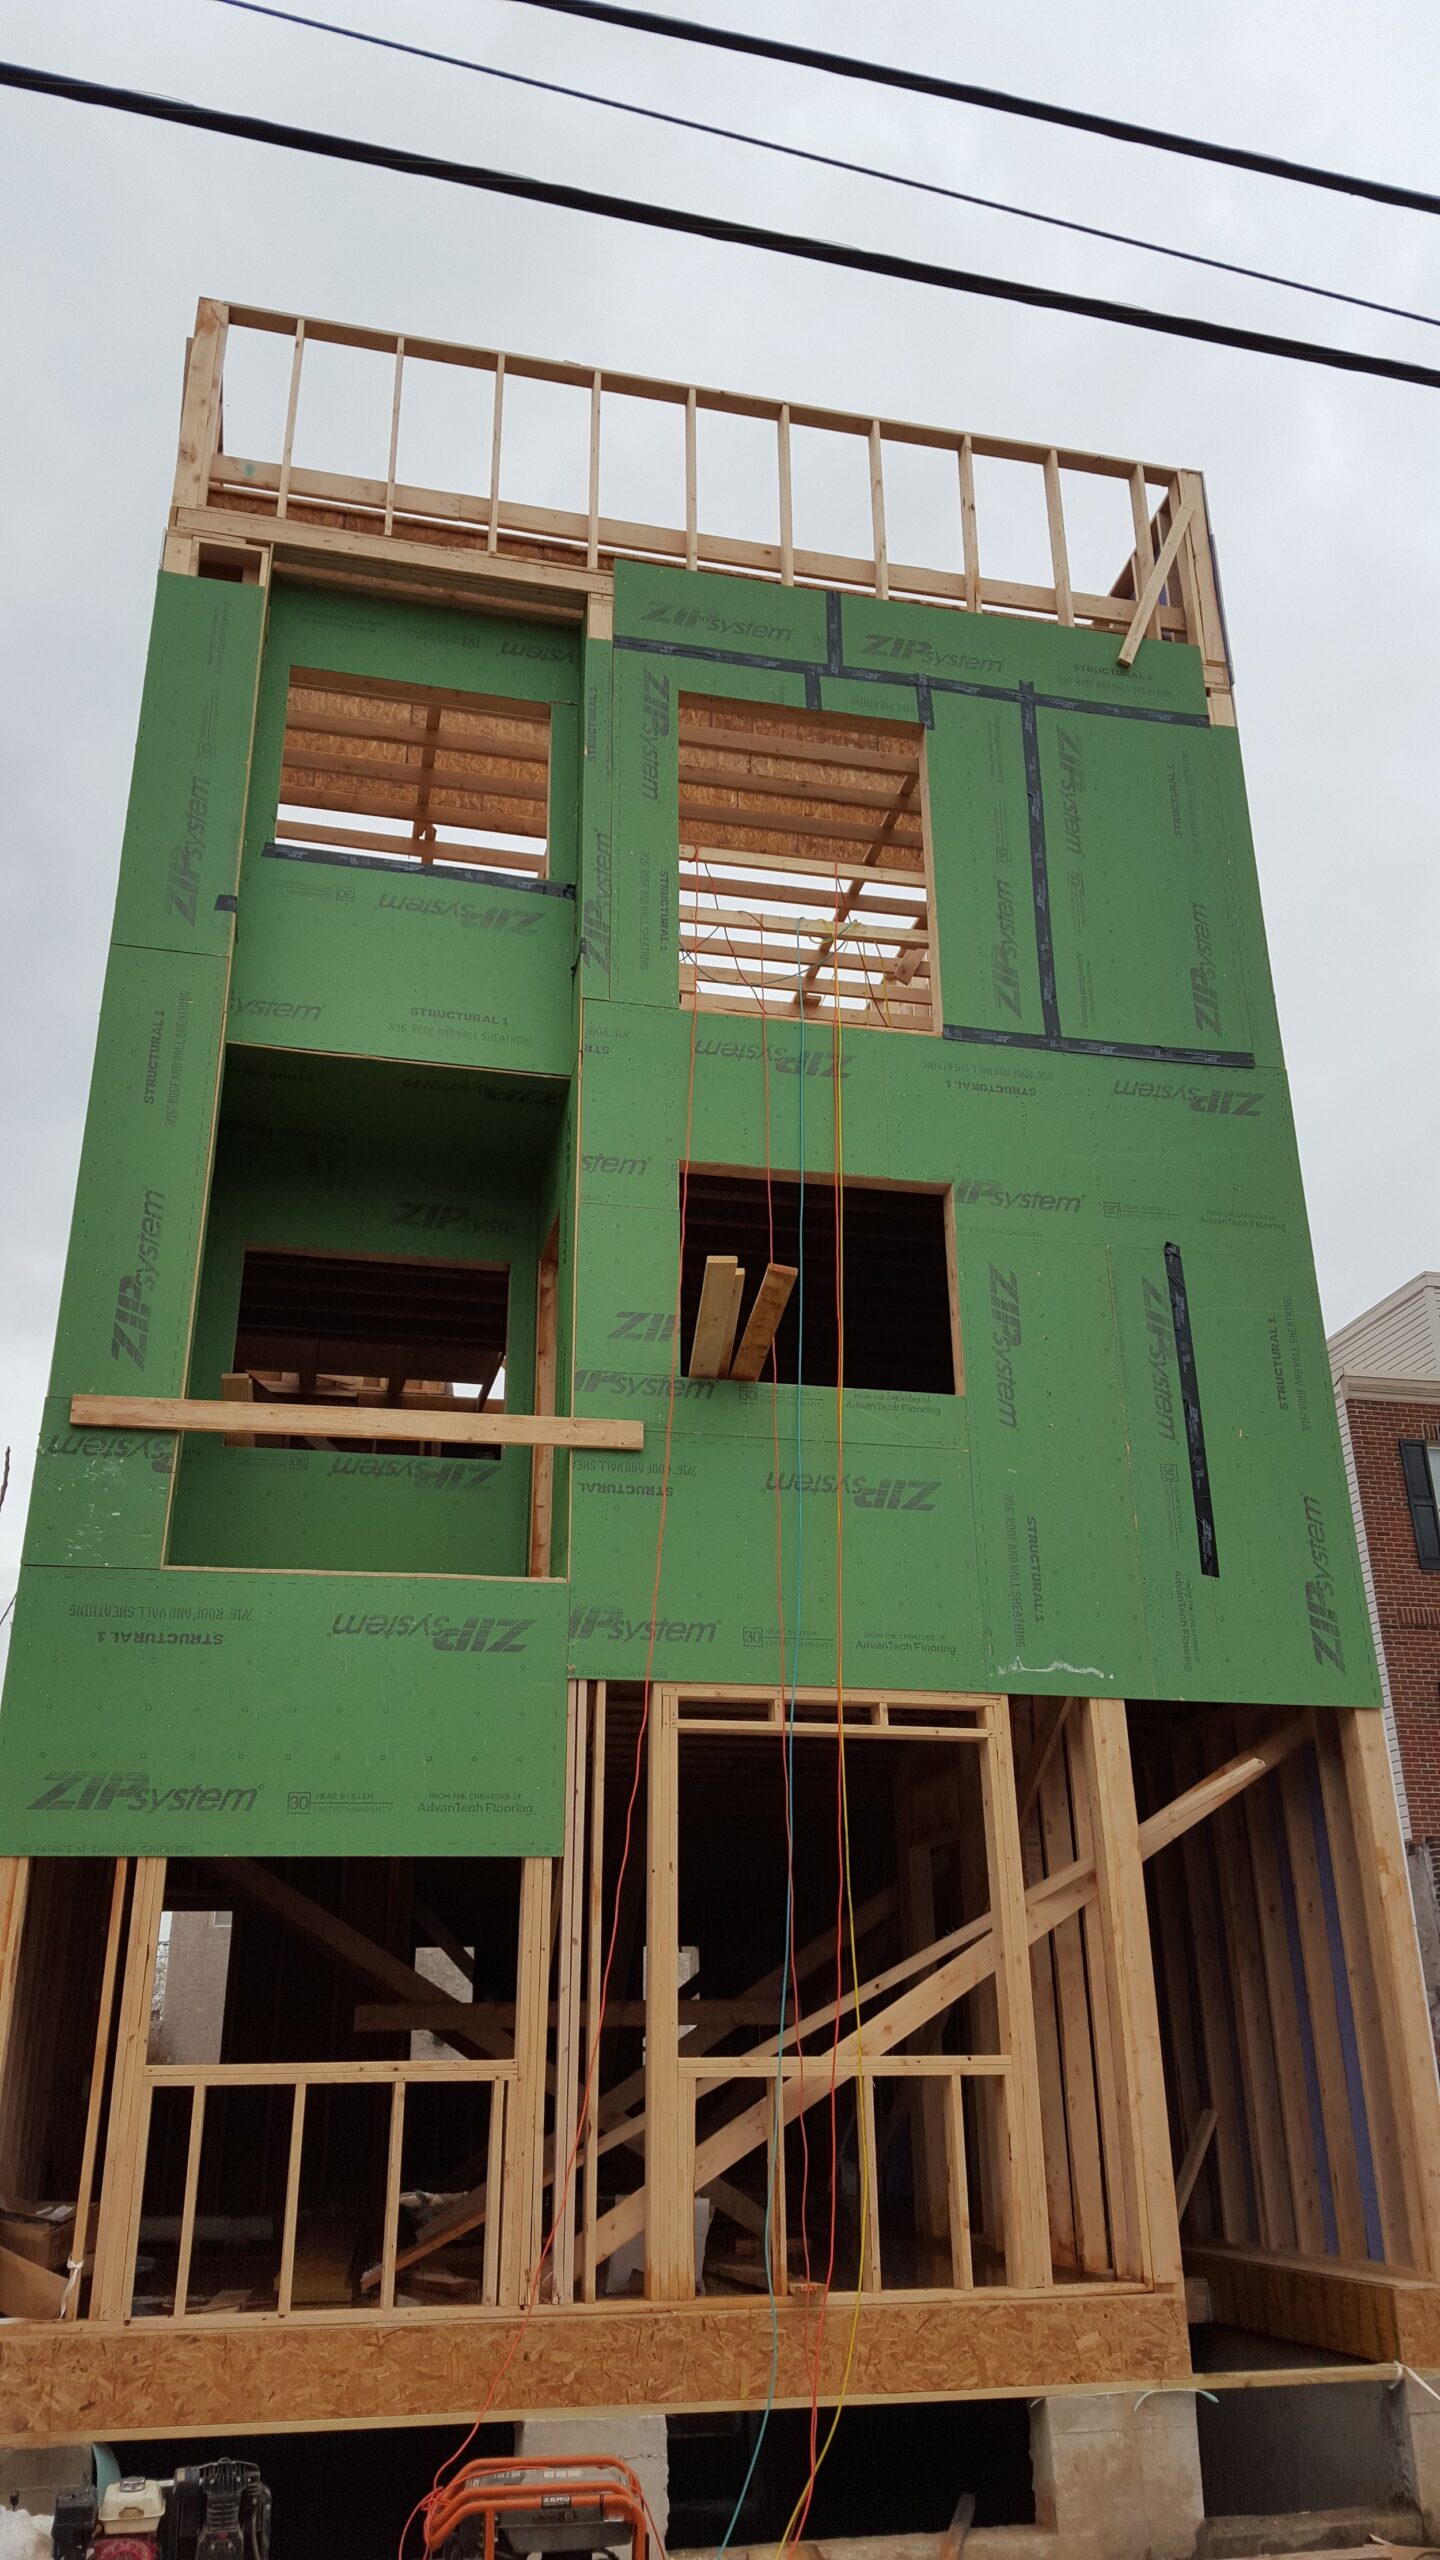 sheathing going up on the exterior; framing has been topped out